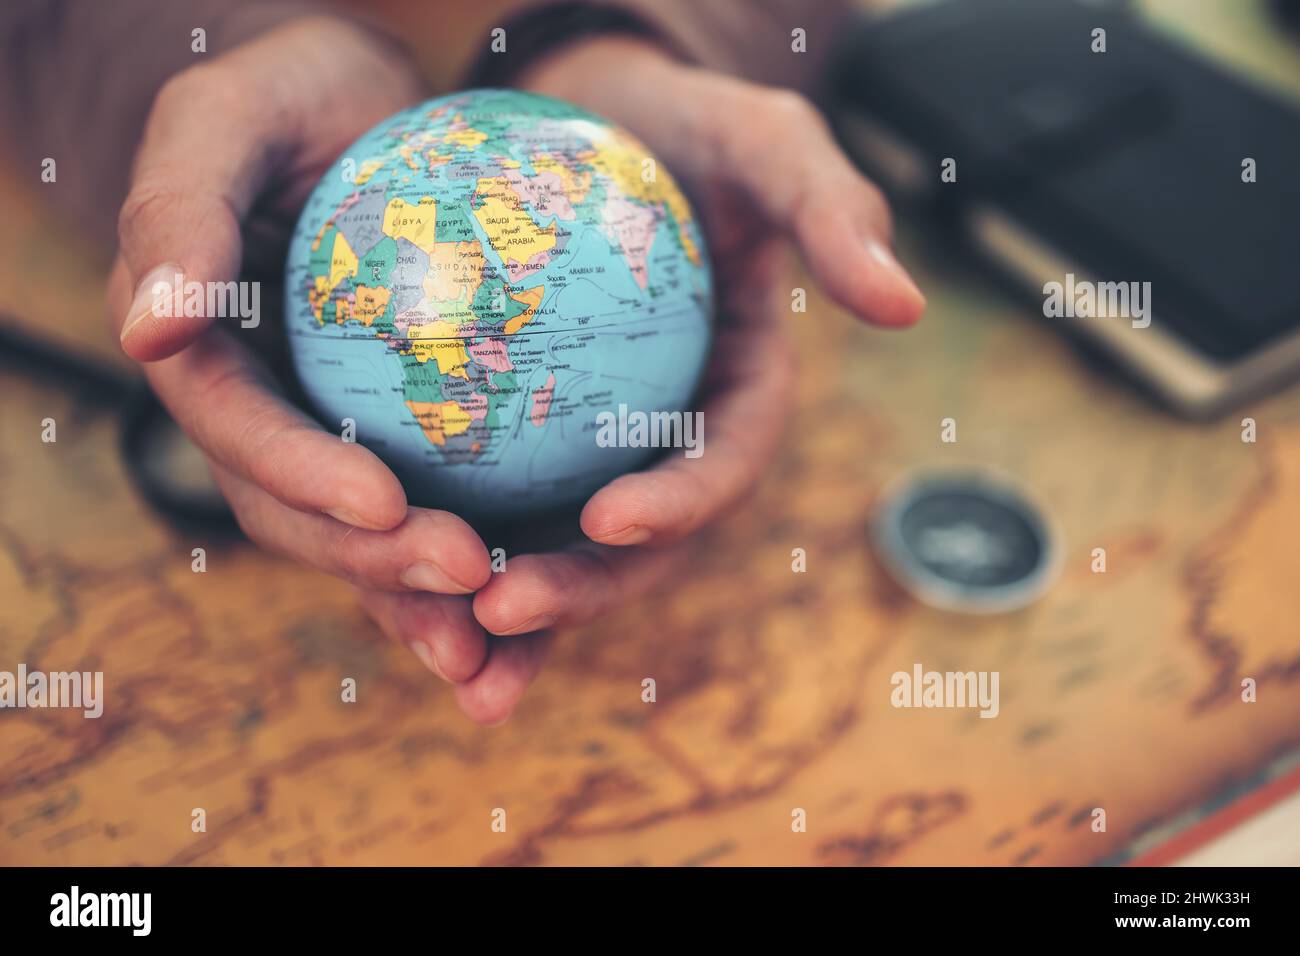 Globe, whole world in hands and compass, magnifying glass and book on route map on the table. Travel , Adventure and Discovery concept. Stock Photo